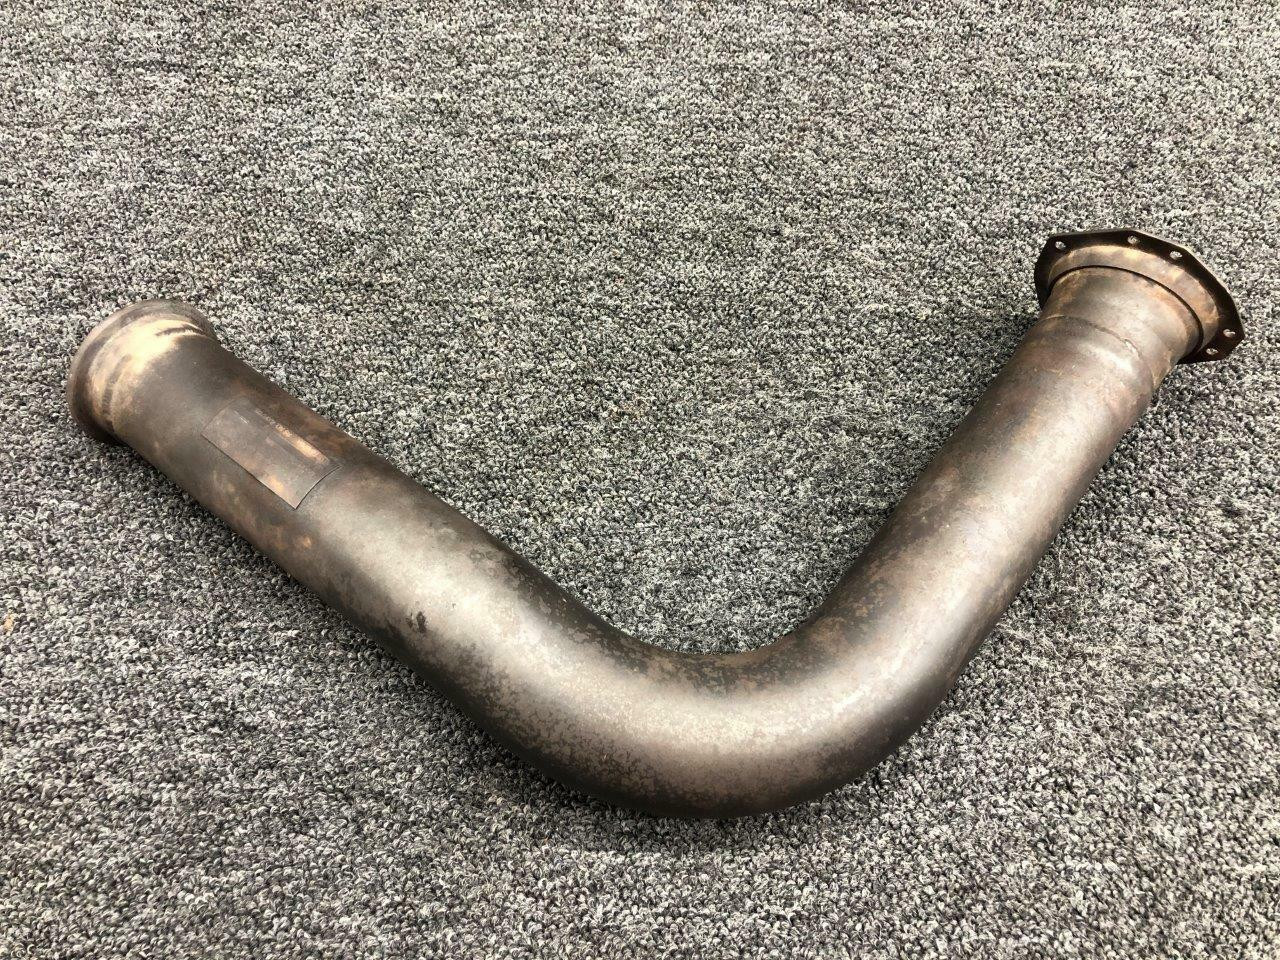 K9910301-33 Continental TSIO-520-E Knisley Welding Exhaust Stack LH